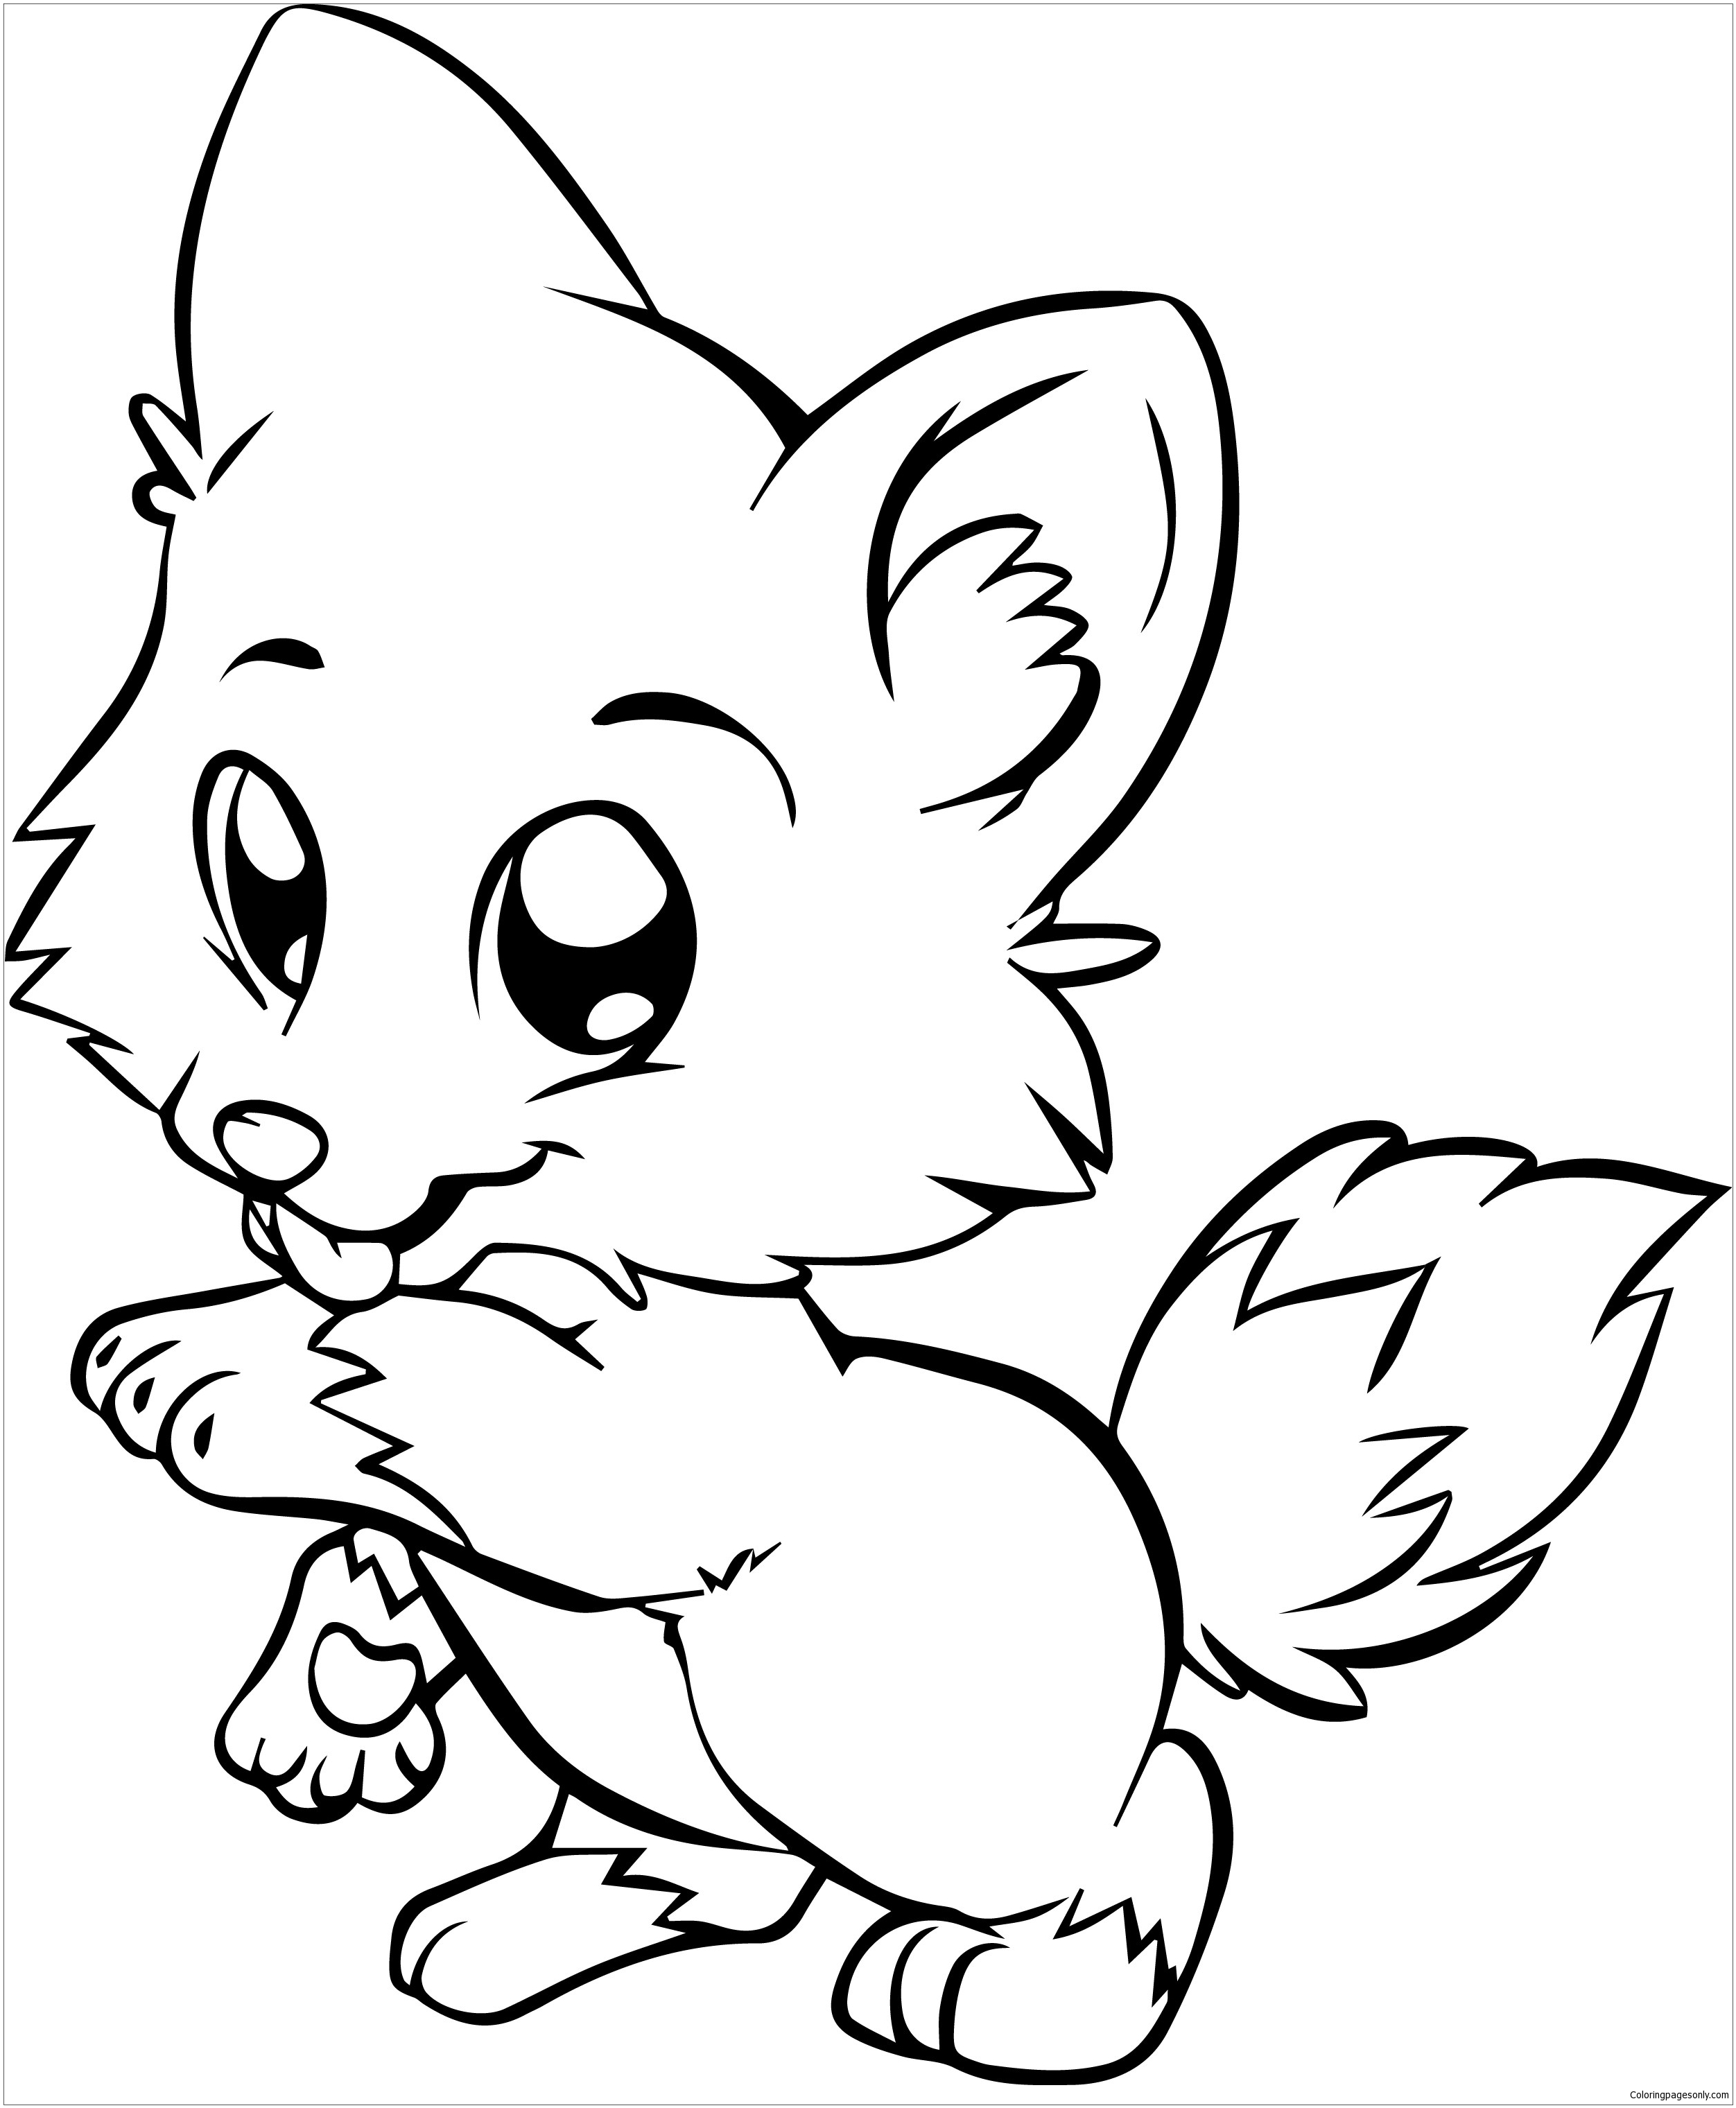 Baby Dog Coloring Page Free Coloring Pages Online